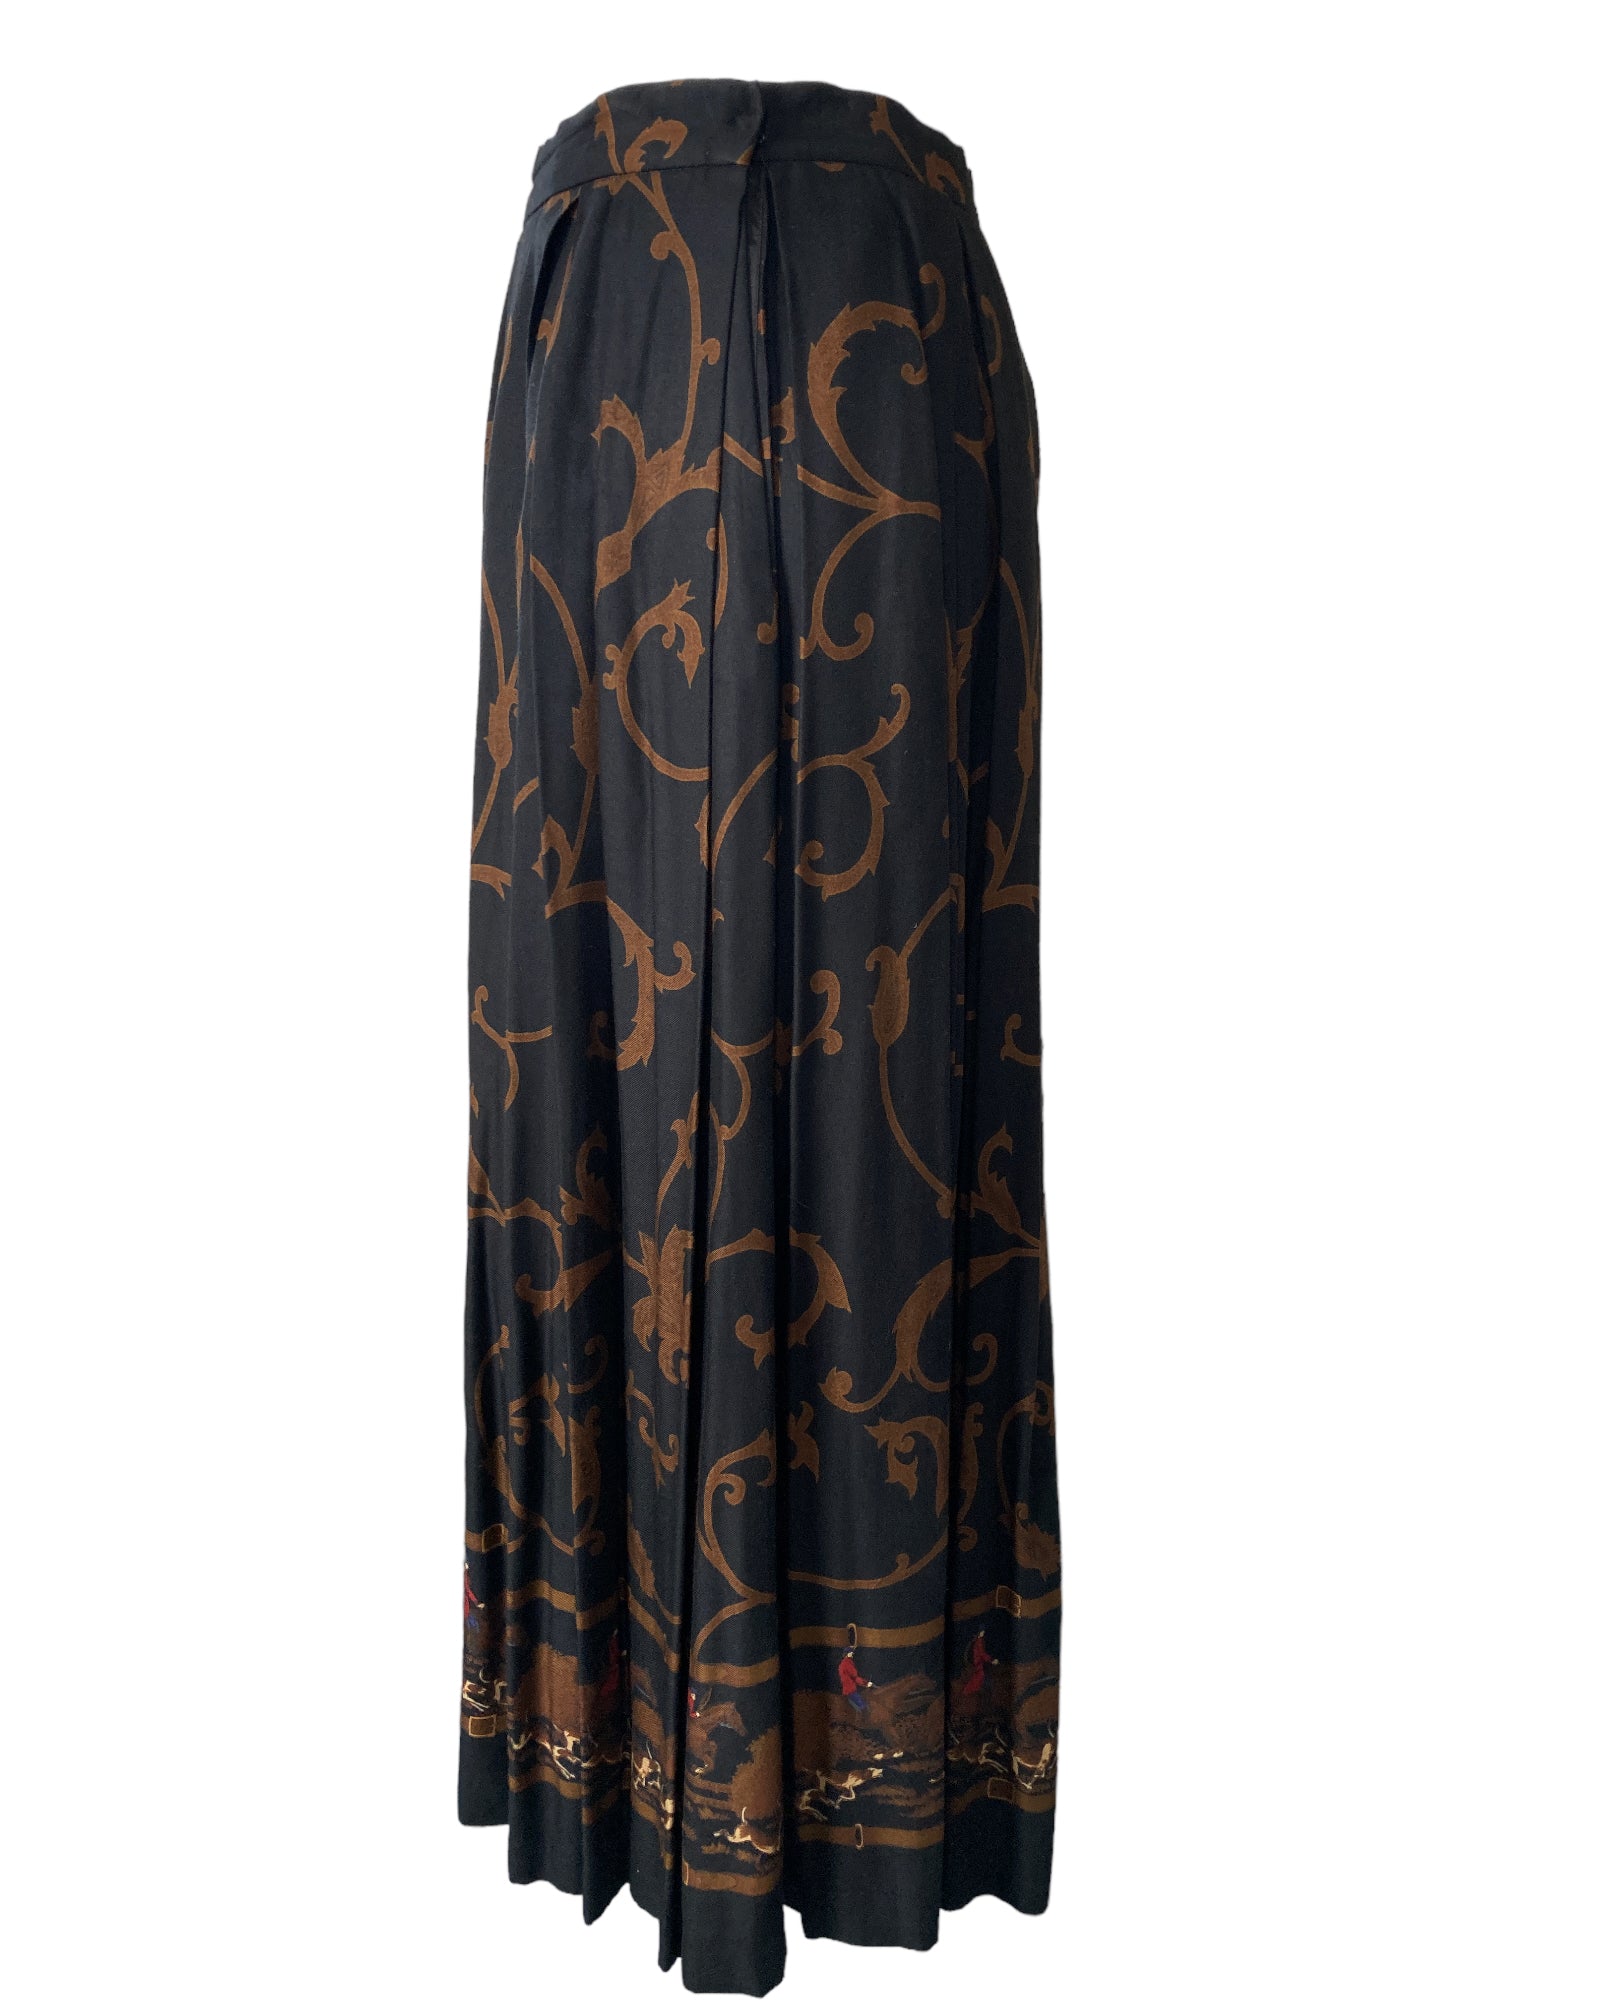 Neiman Marcus Vintage Horses and Hounds Long Skirt, 10